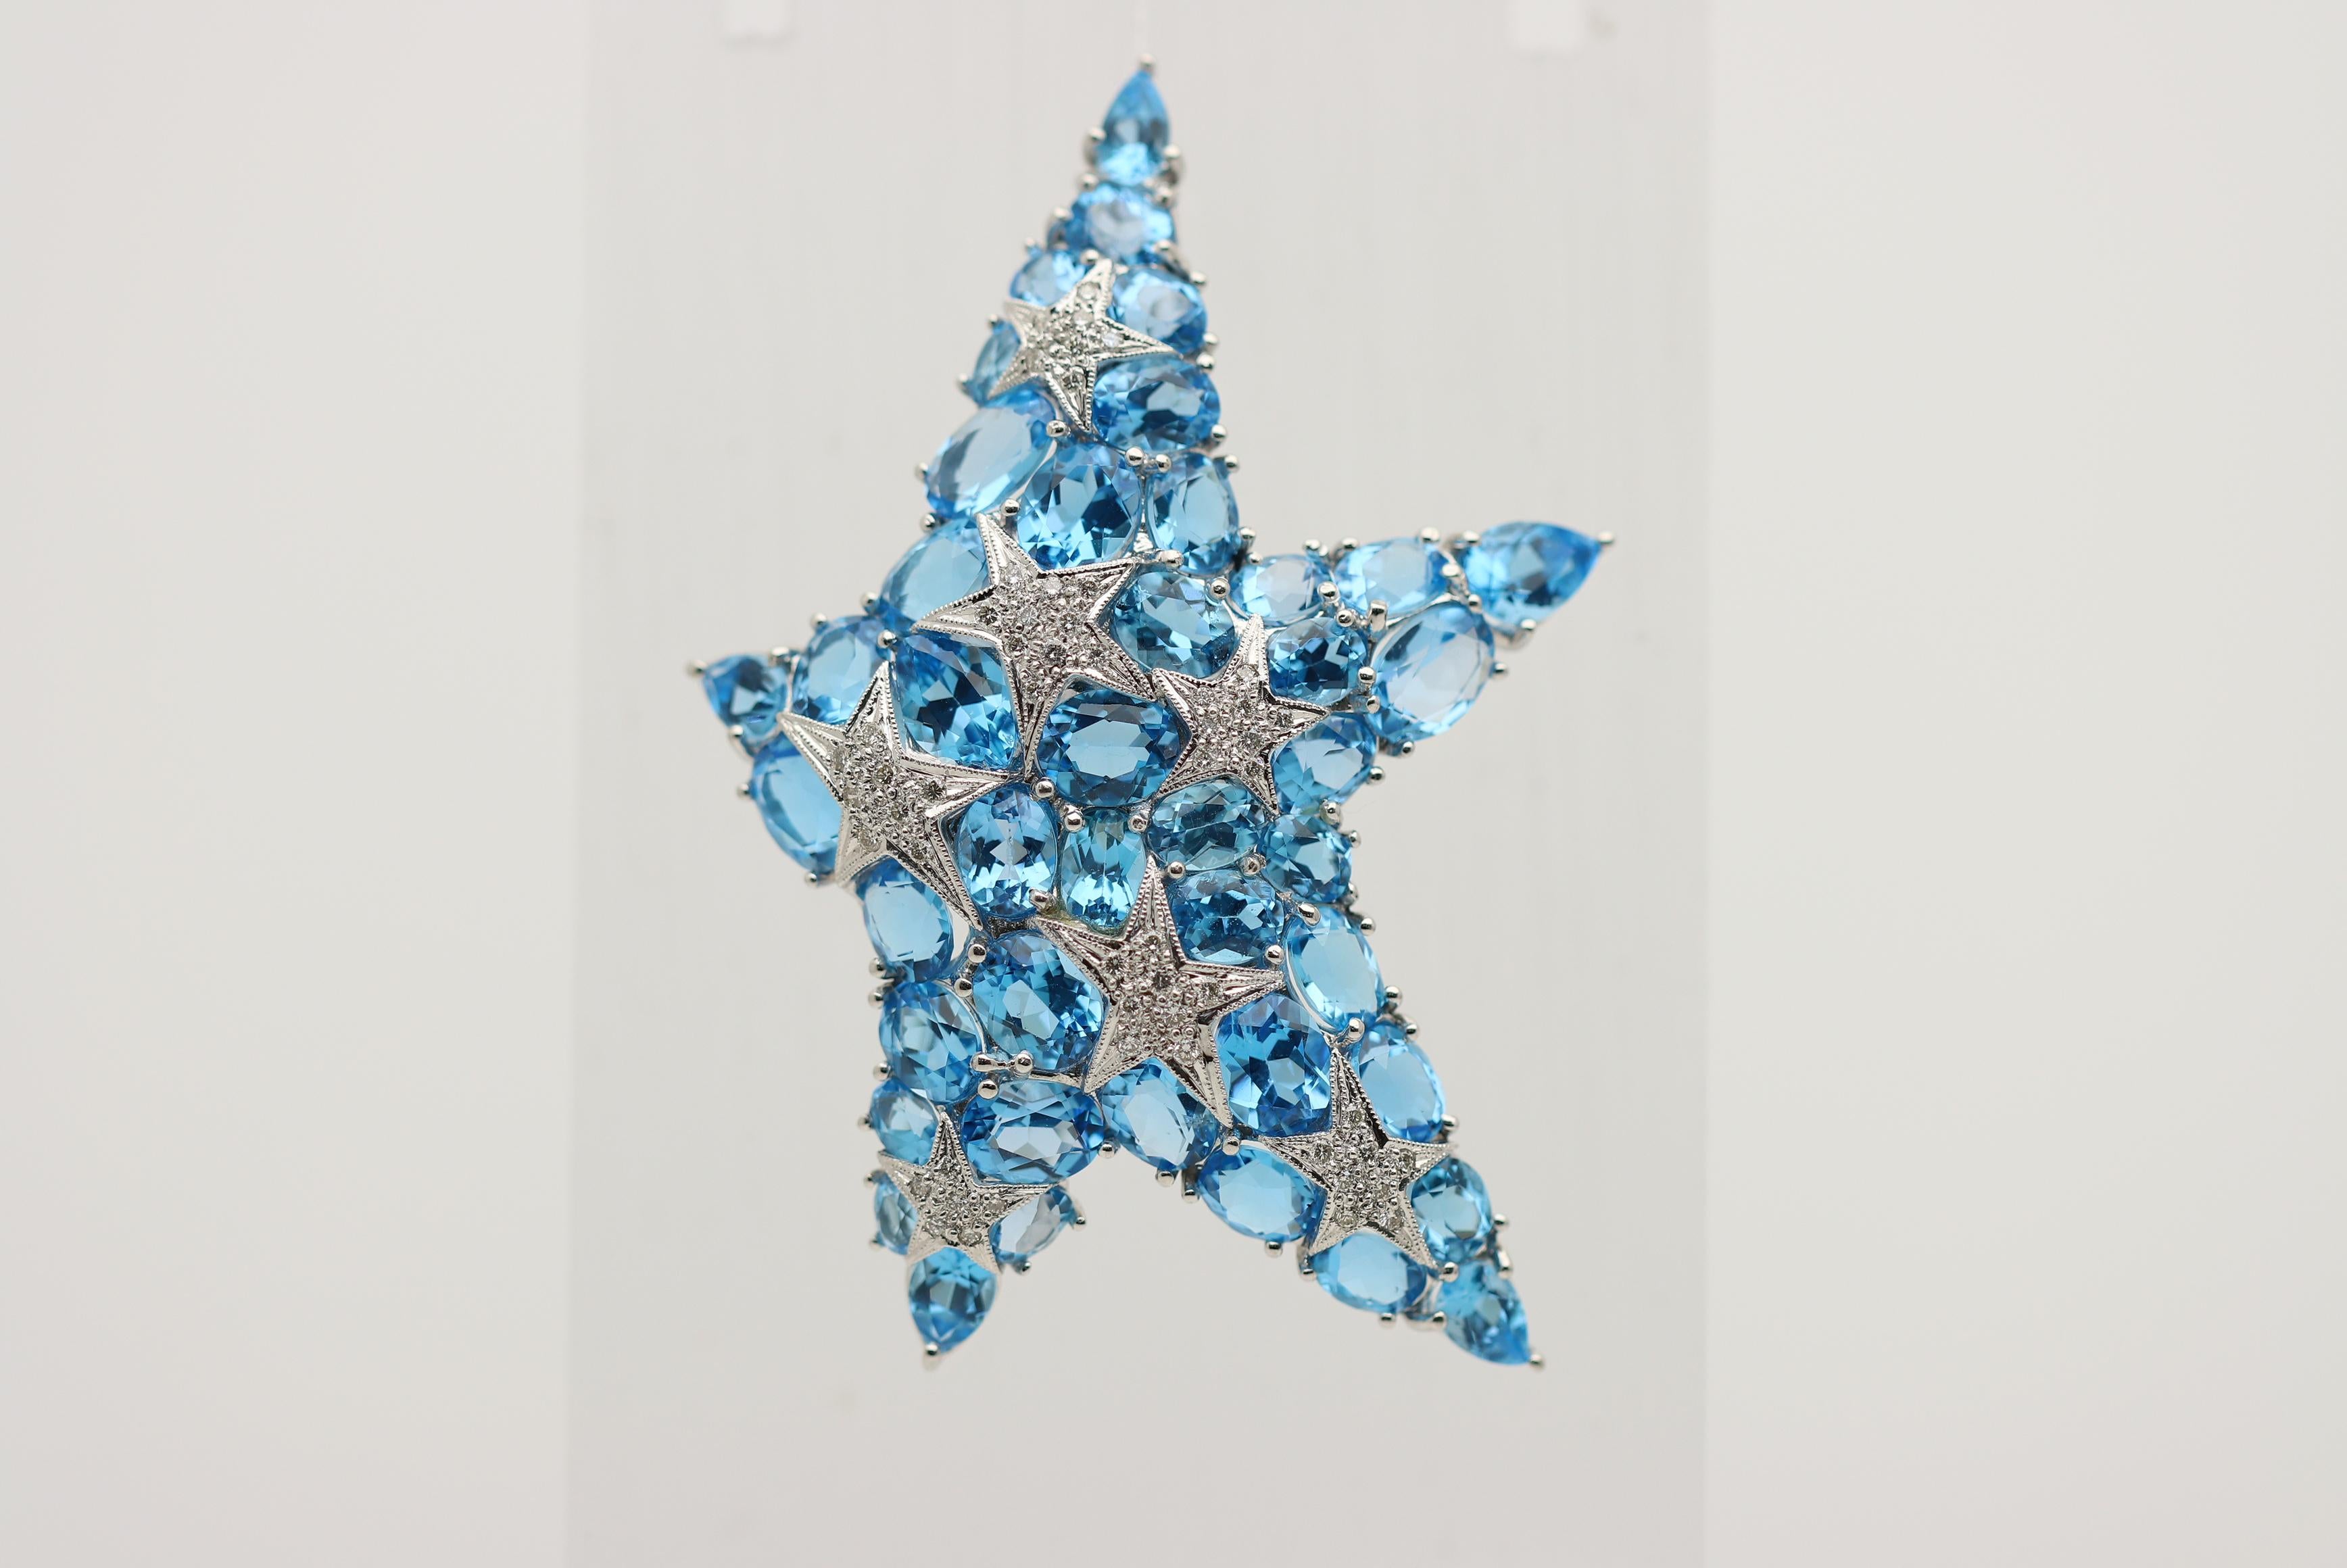 A large, unique, and stylish brooch featuring a blue topaz and diamond studded starfish! There are a total of 39.25 carats of bright sky-blue topaz in a variety of shapes, mainly oval-shape along with pear-shapes set on the ends of the star’s